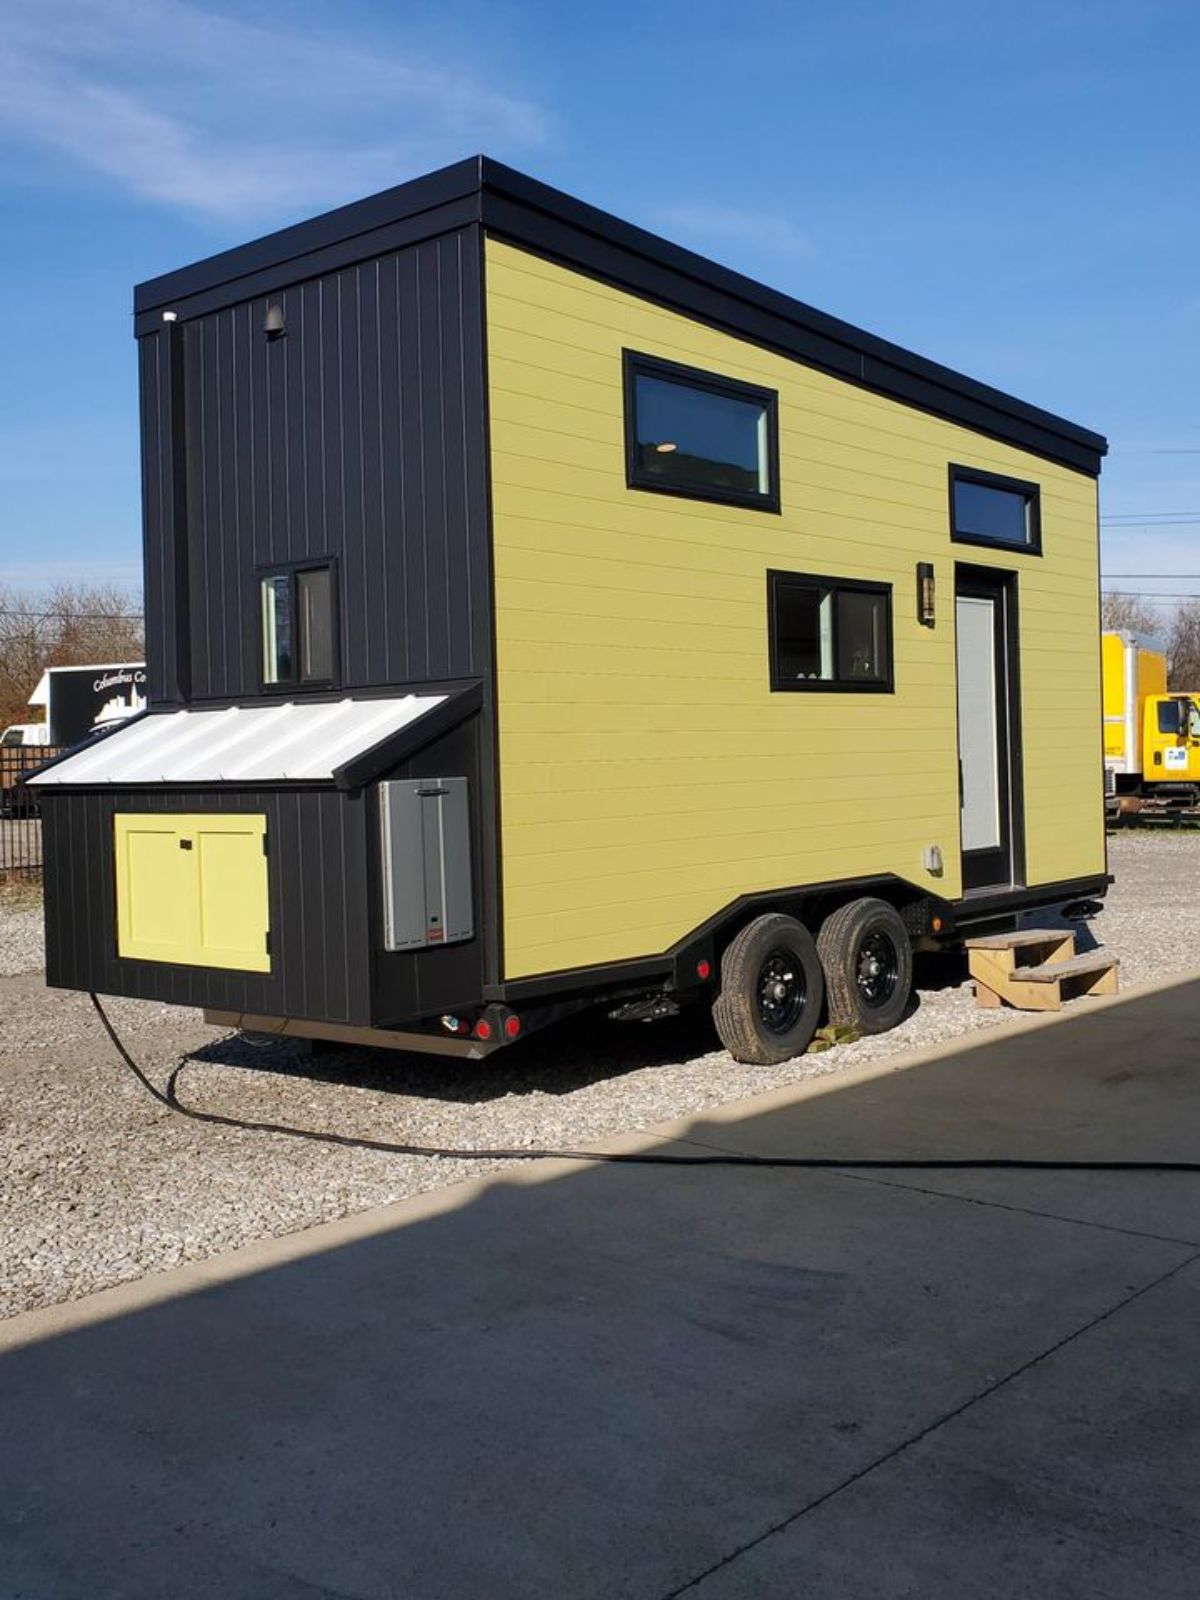 lime green and black tiny home with small storage at back of home